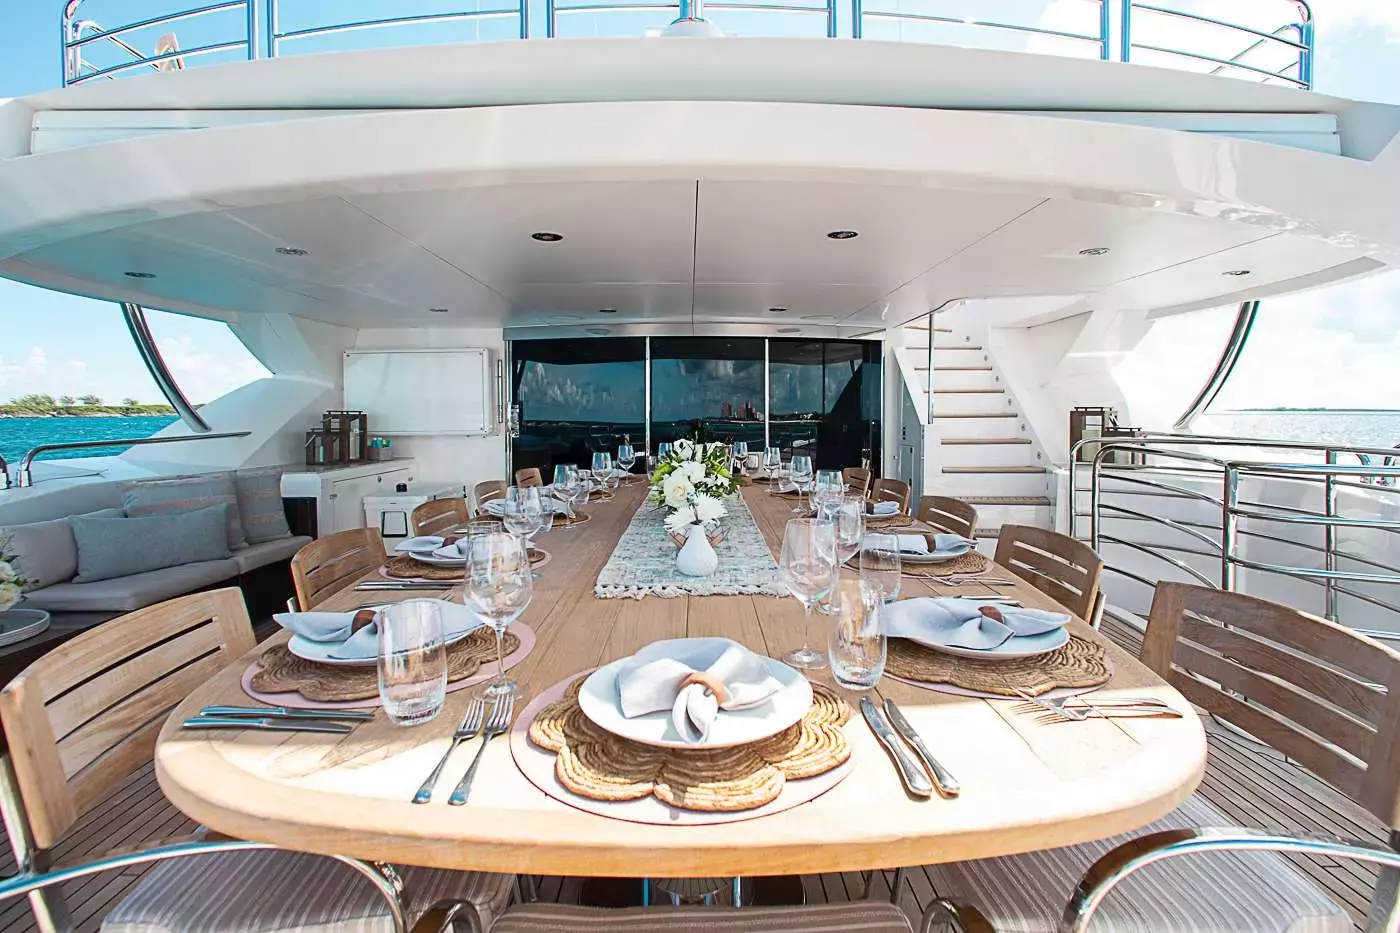 Acacia by Sunseeker - Top rates for a Rental of a private Superyacht in Florida USA